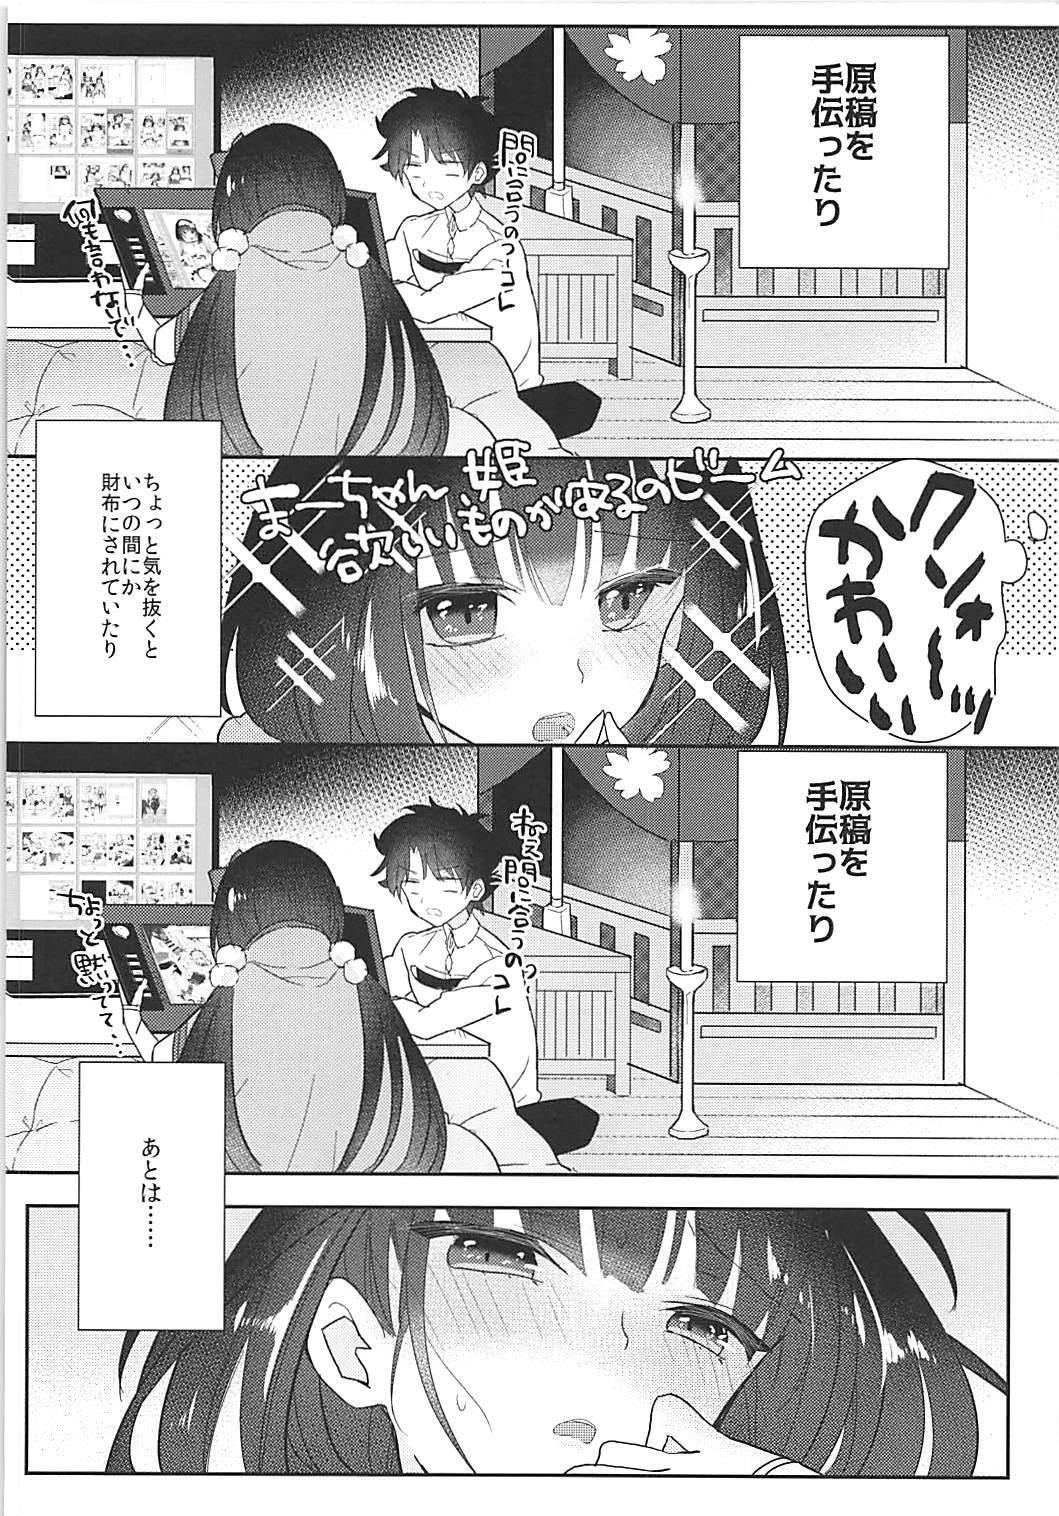 Girl On Girl Hime-chan to Nakayoshi - Fate grand order Bed - Page 9